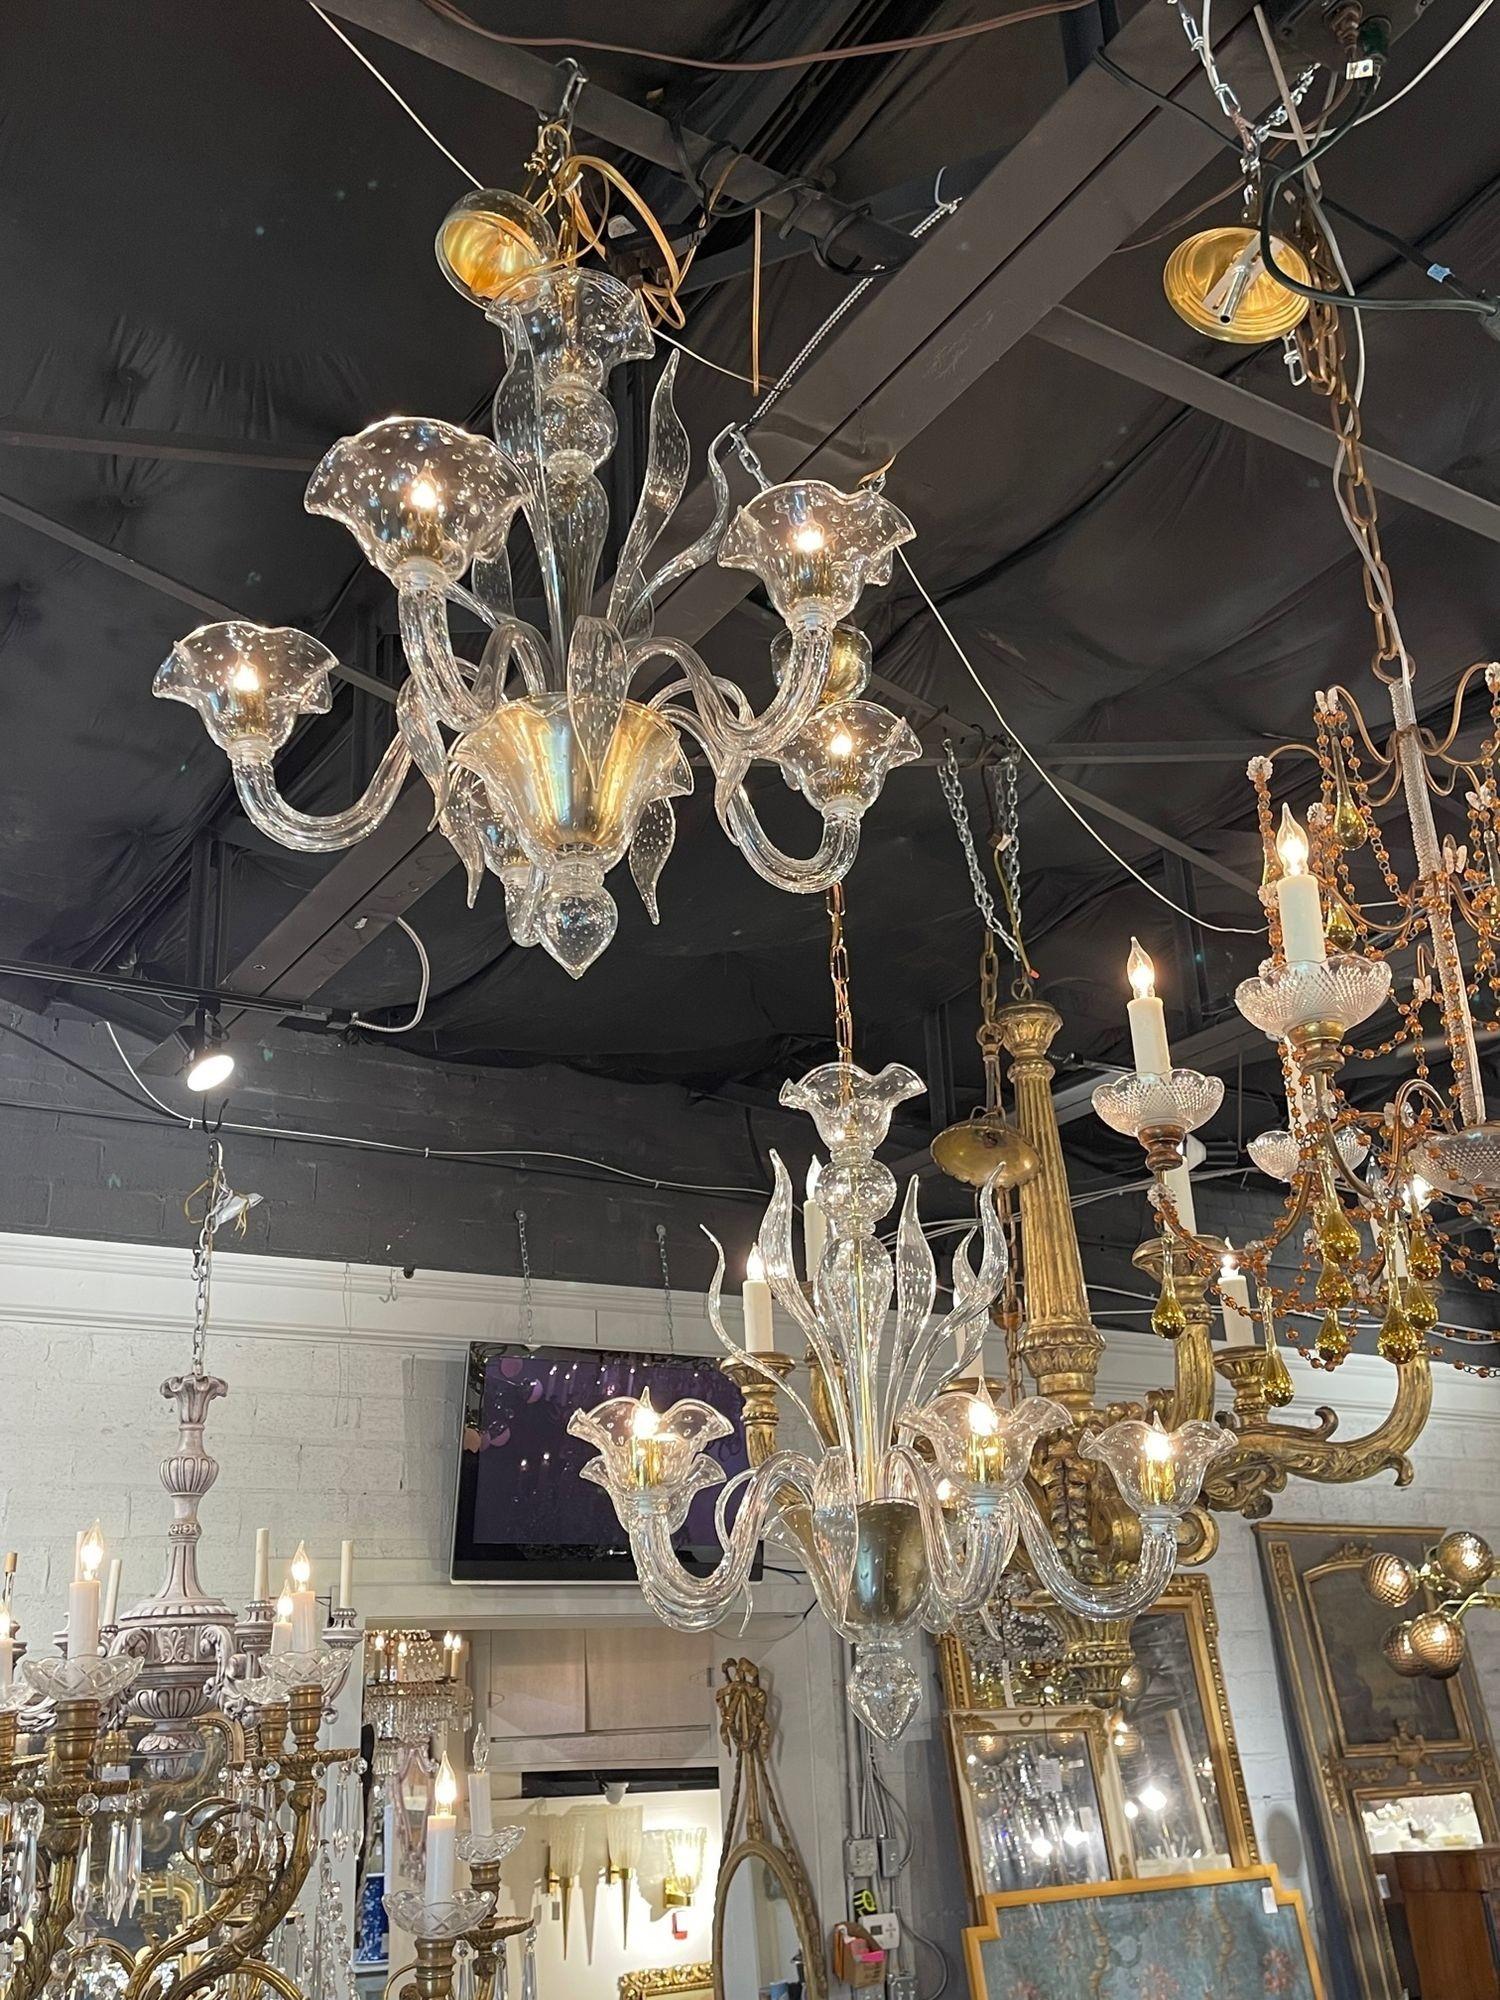 Pair of modern Murano gold bubble glass 5 light chandeliers. Circa 2000. These chandeliers hsvr been professionally re-wired, cleaned and are ready to hang. Includes matching chain and canopy. Sure to make a statement! Note: Sold as a pair.